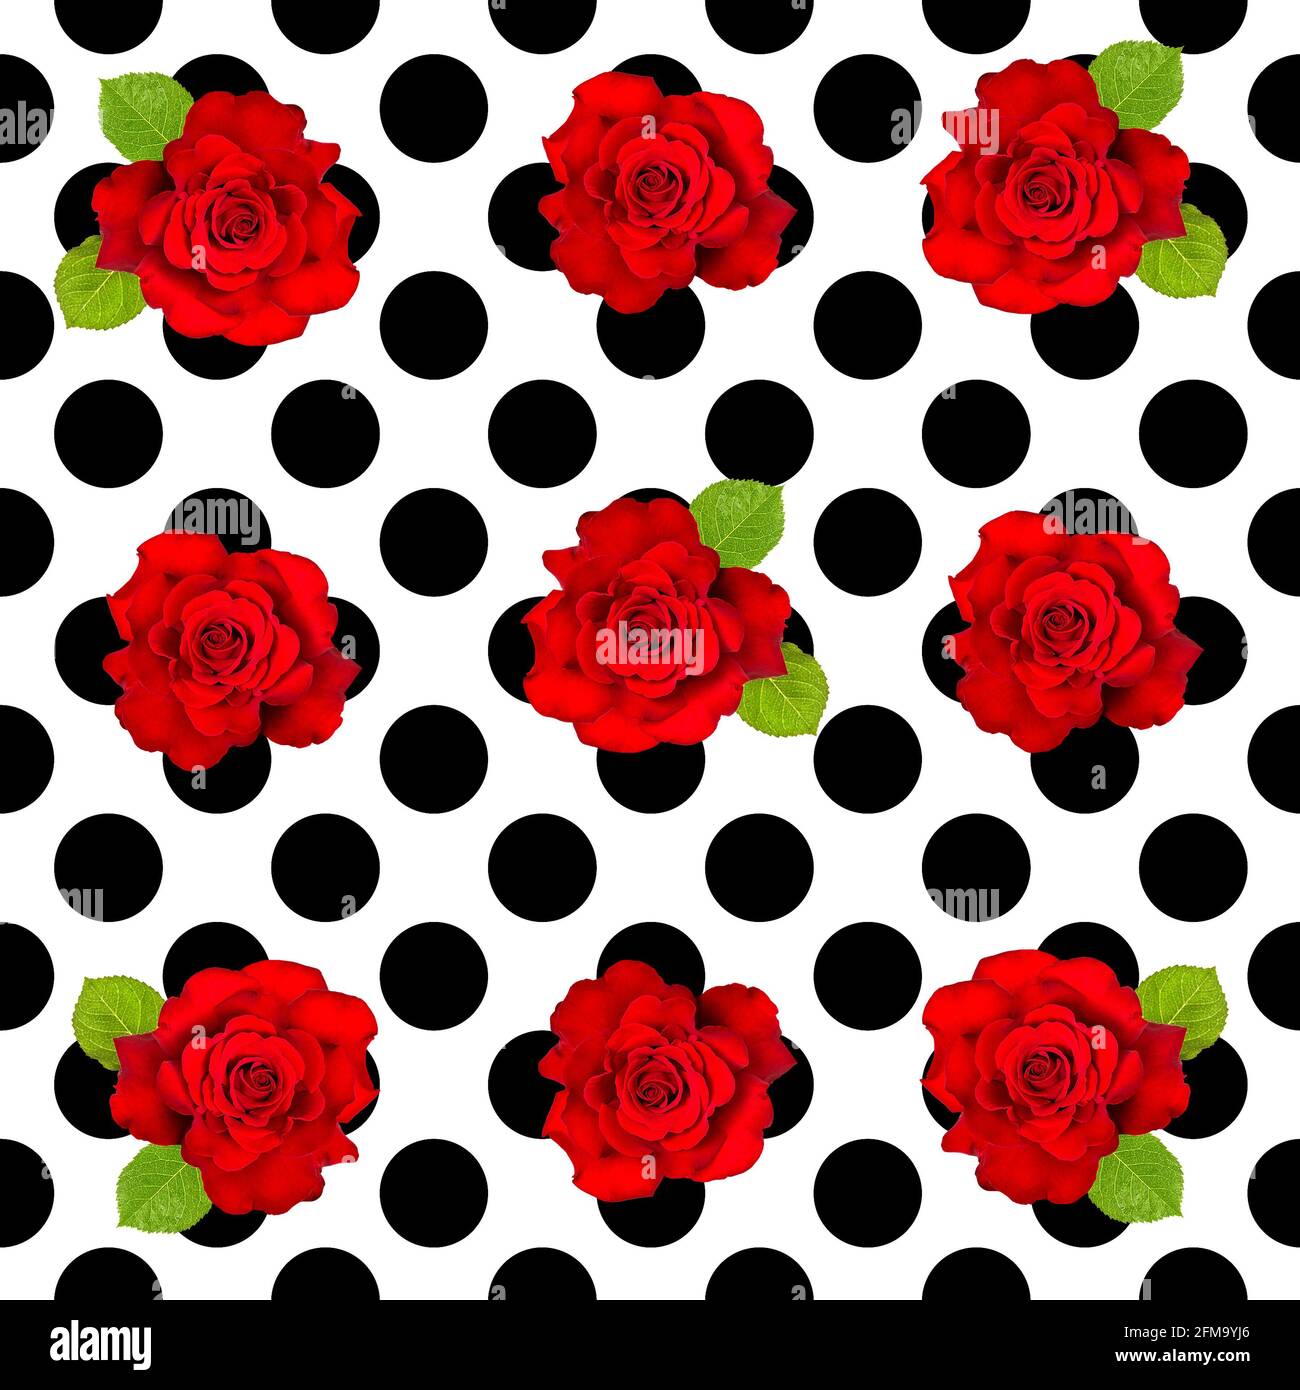 Red digital background Cut Out Stock Images & Pictures - Alamy